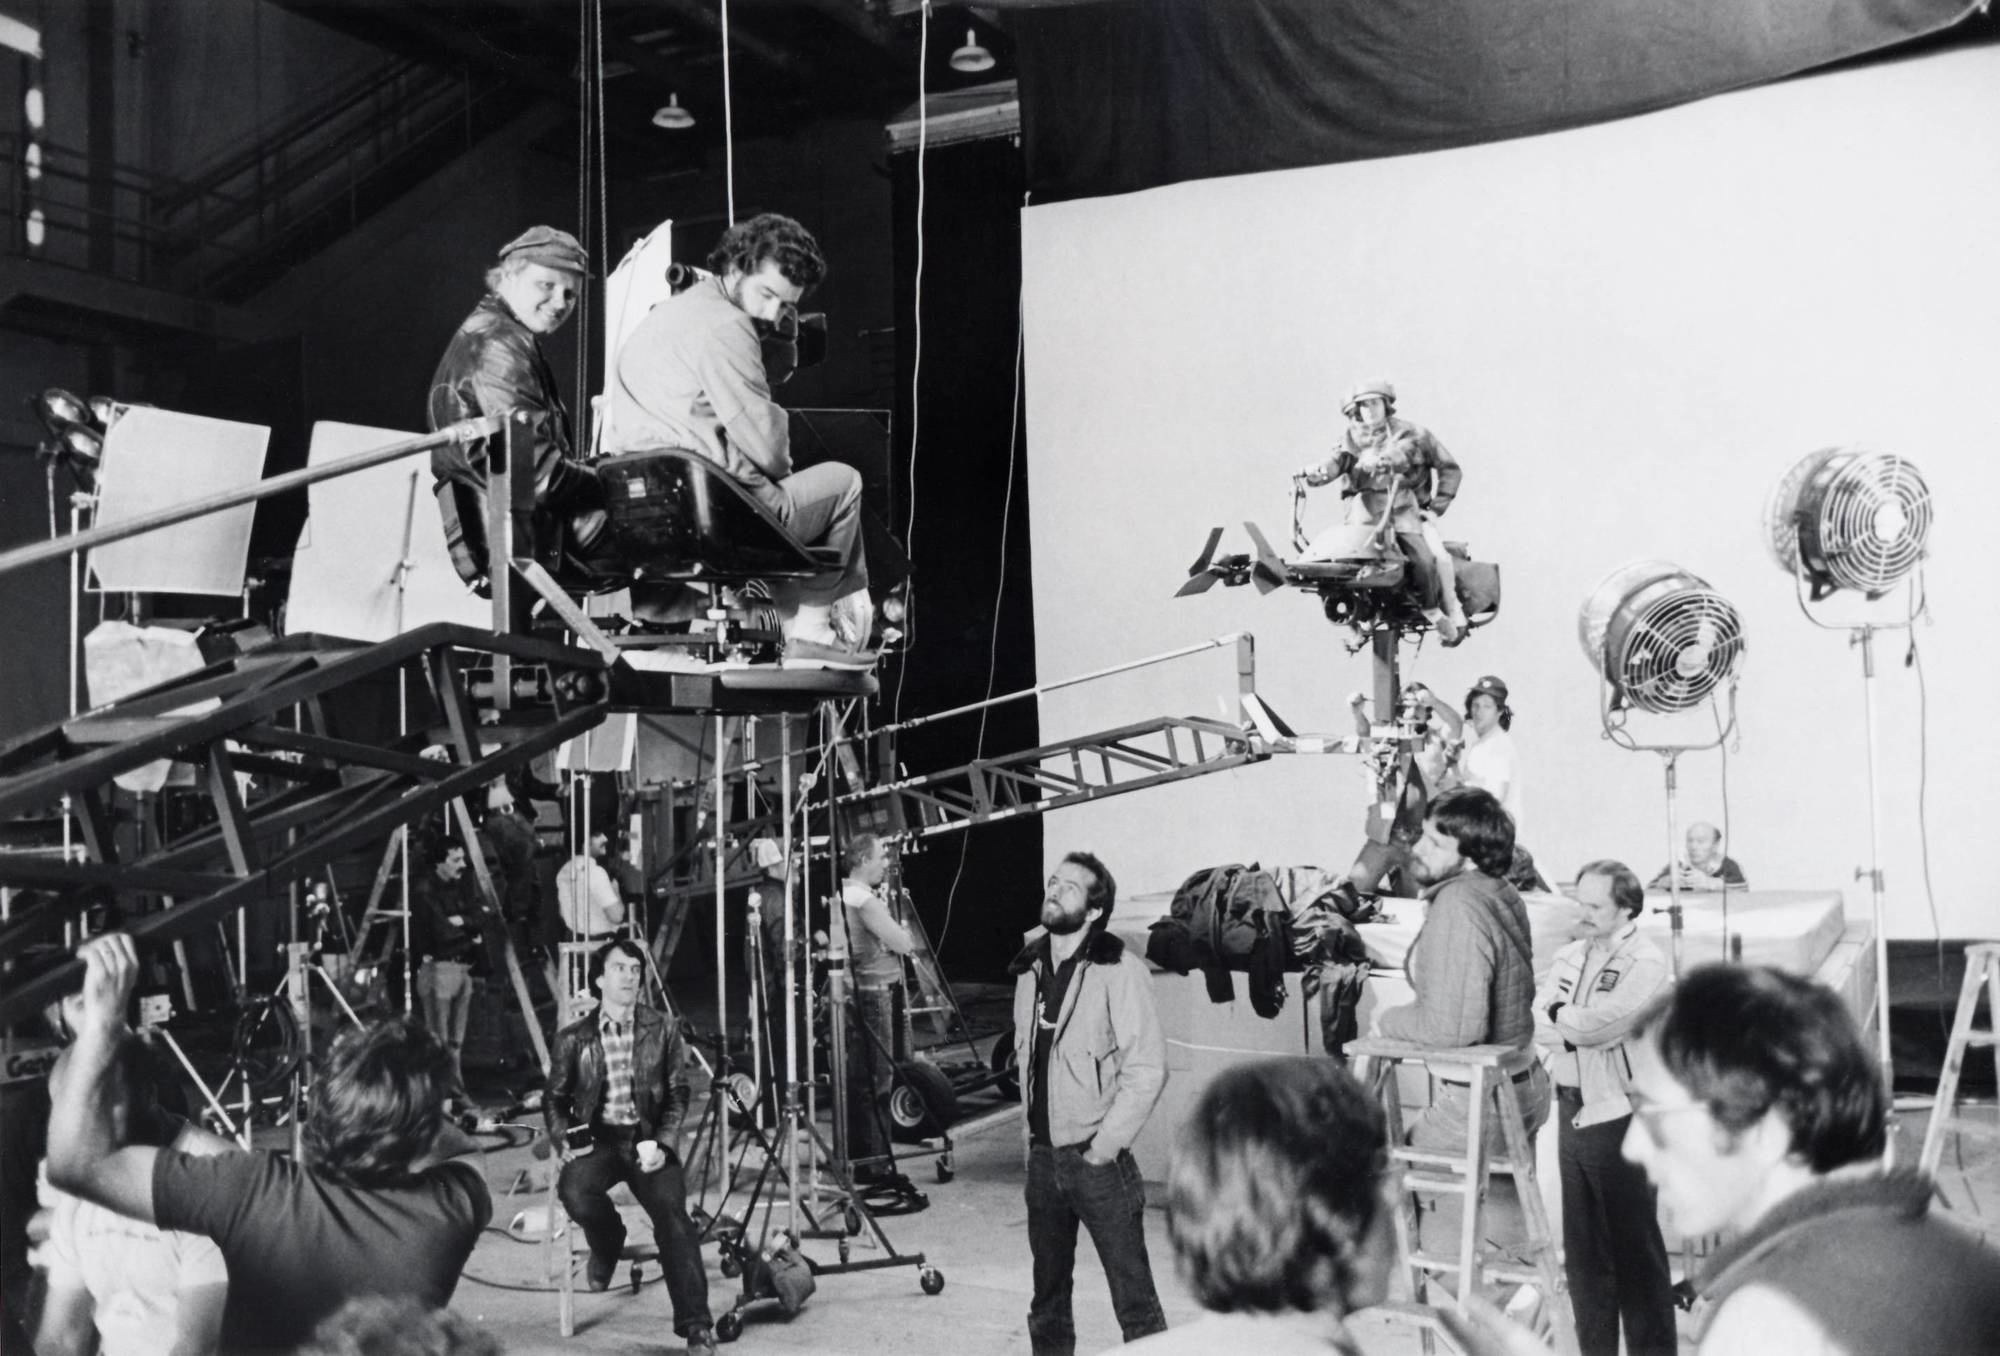 Setting-up the chase scene in Return of the Jedi.